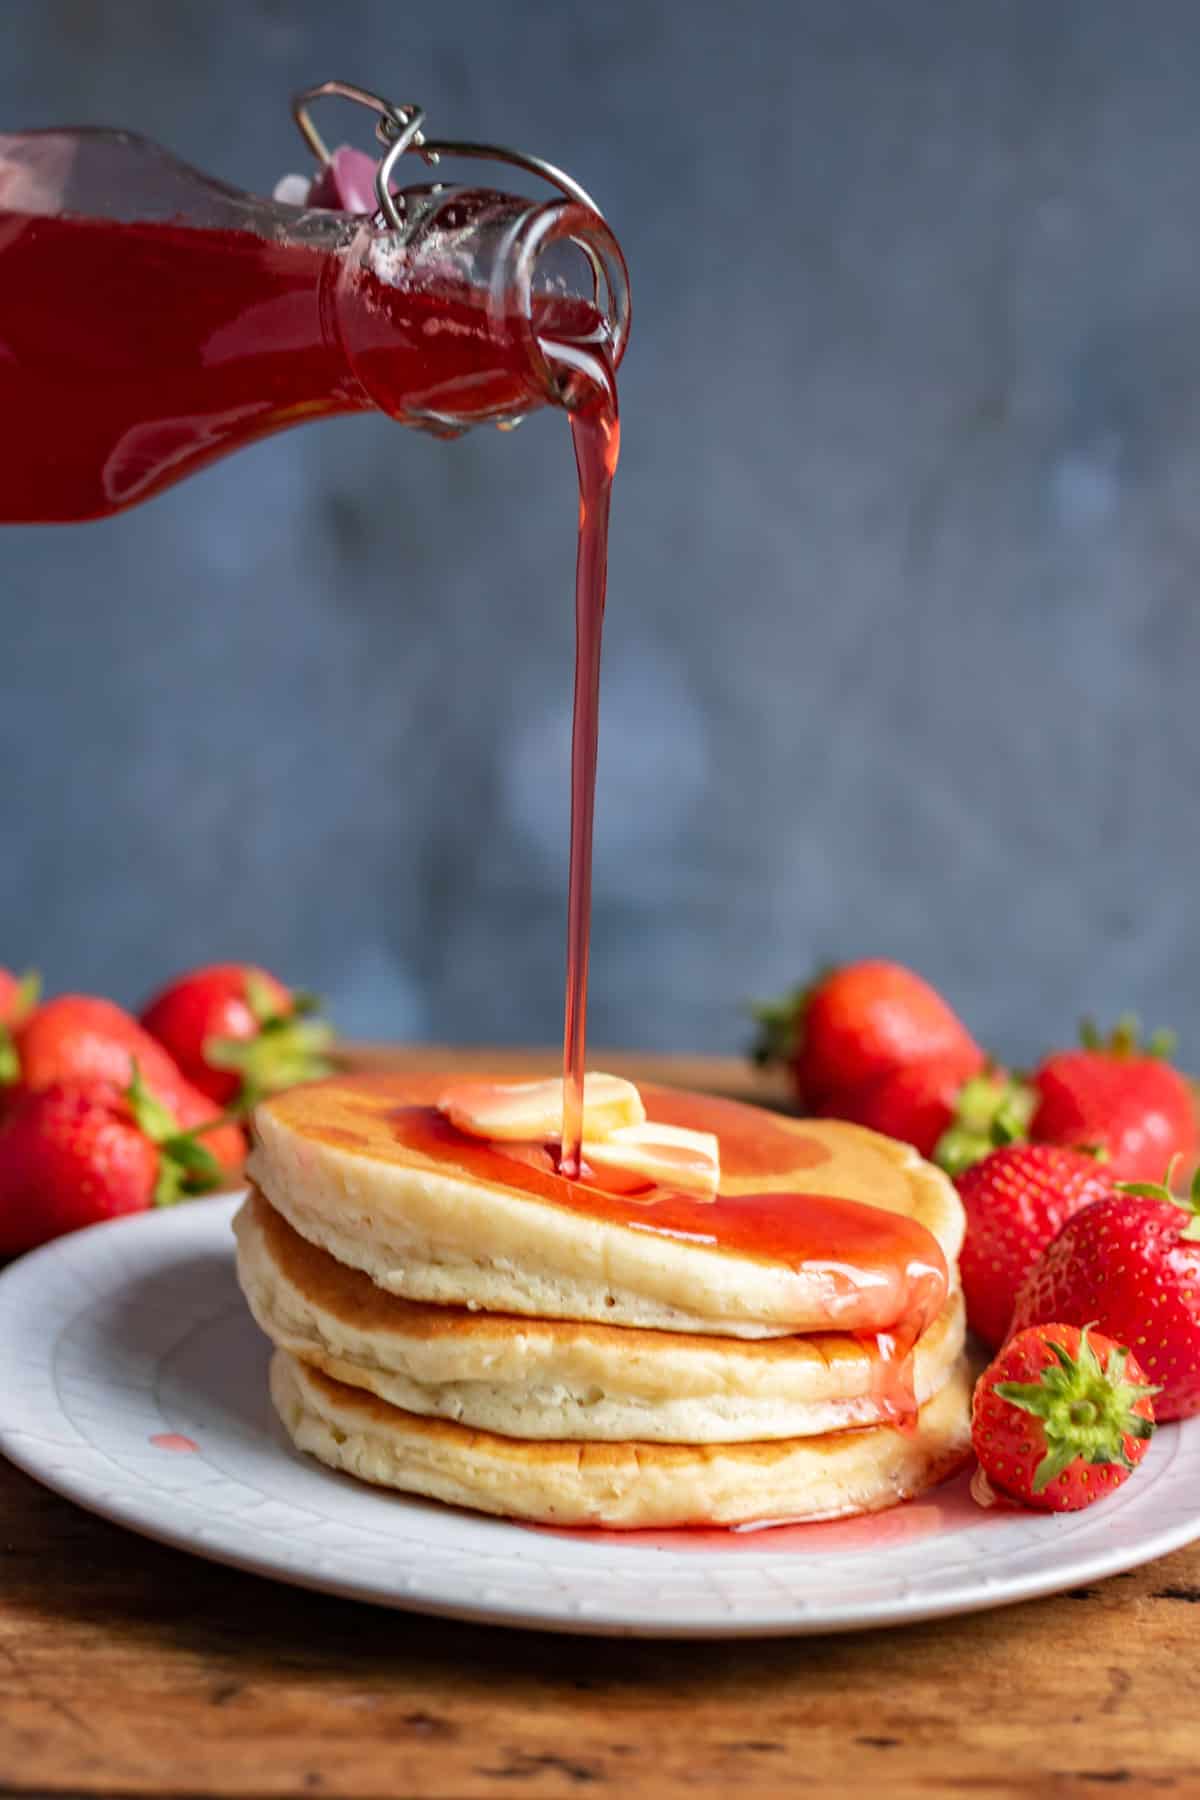 Pouring strawberry syrup onto a stack of pancakes.